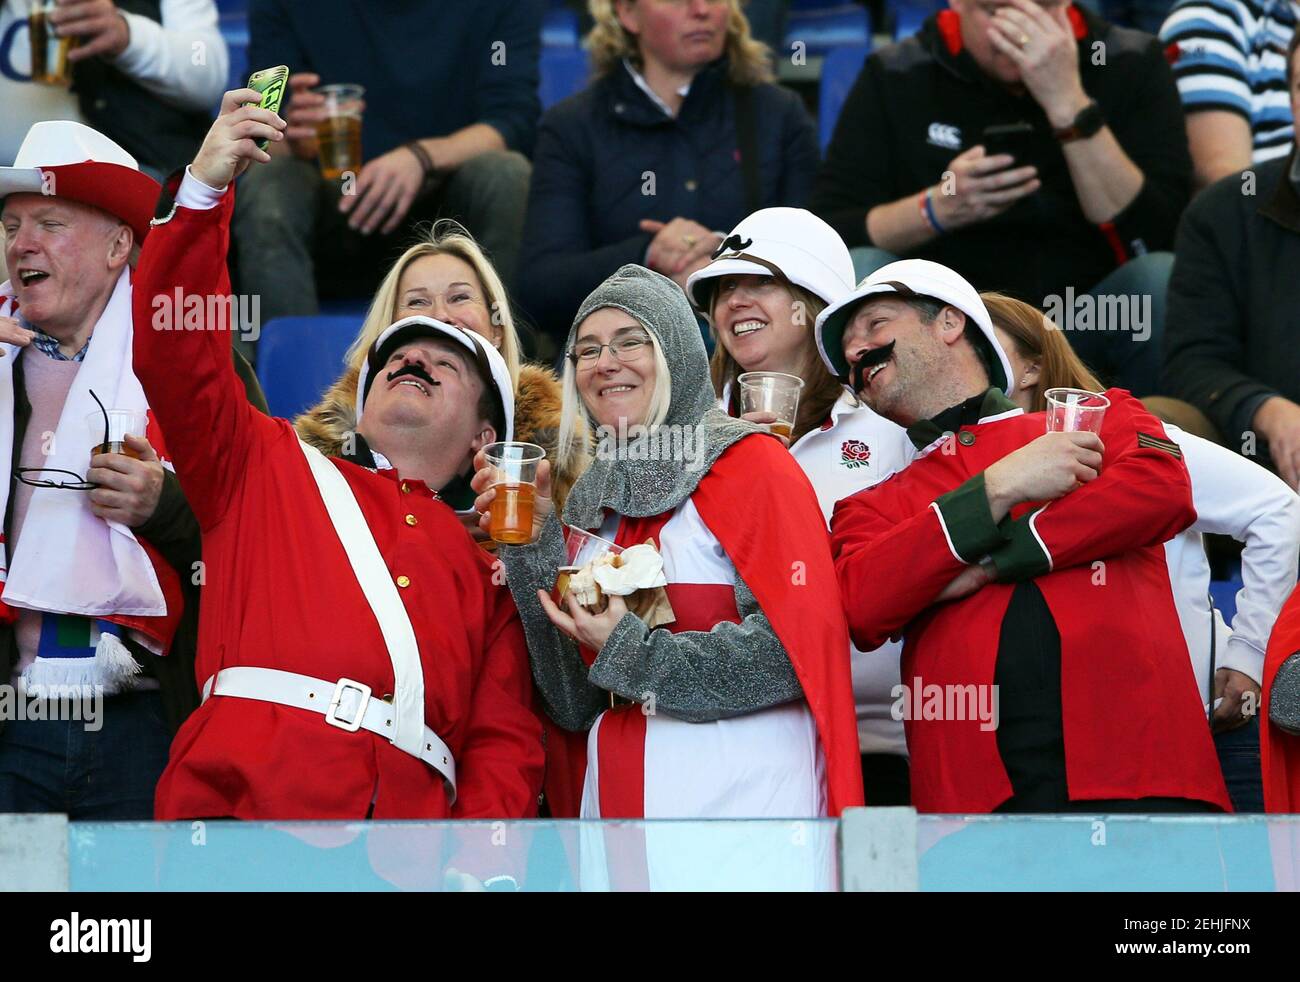 Rugby Union -  Six Nations Championship - Italy vs England - Stadio Olimpico, Rome, Italy - February 4, 2018   England fans before the match     REUTERS/Alessandro Bianchi Stock Photo